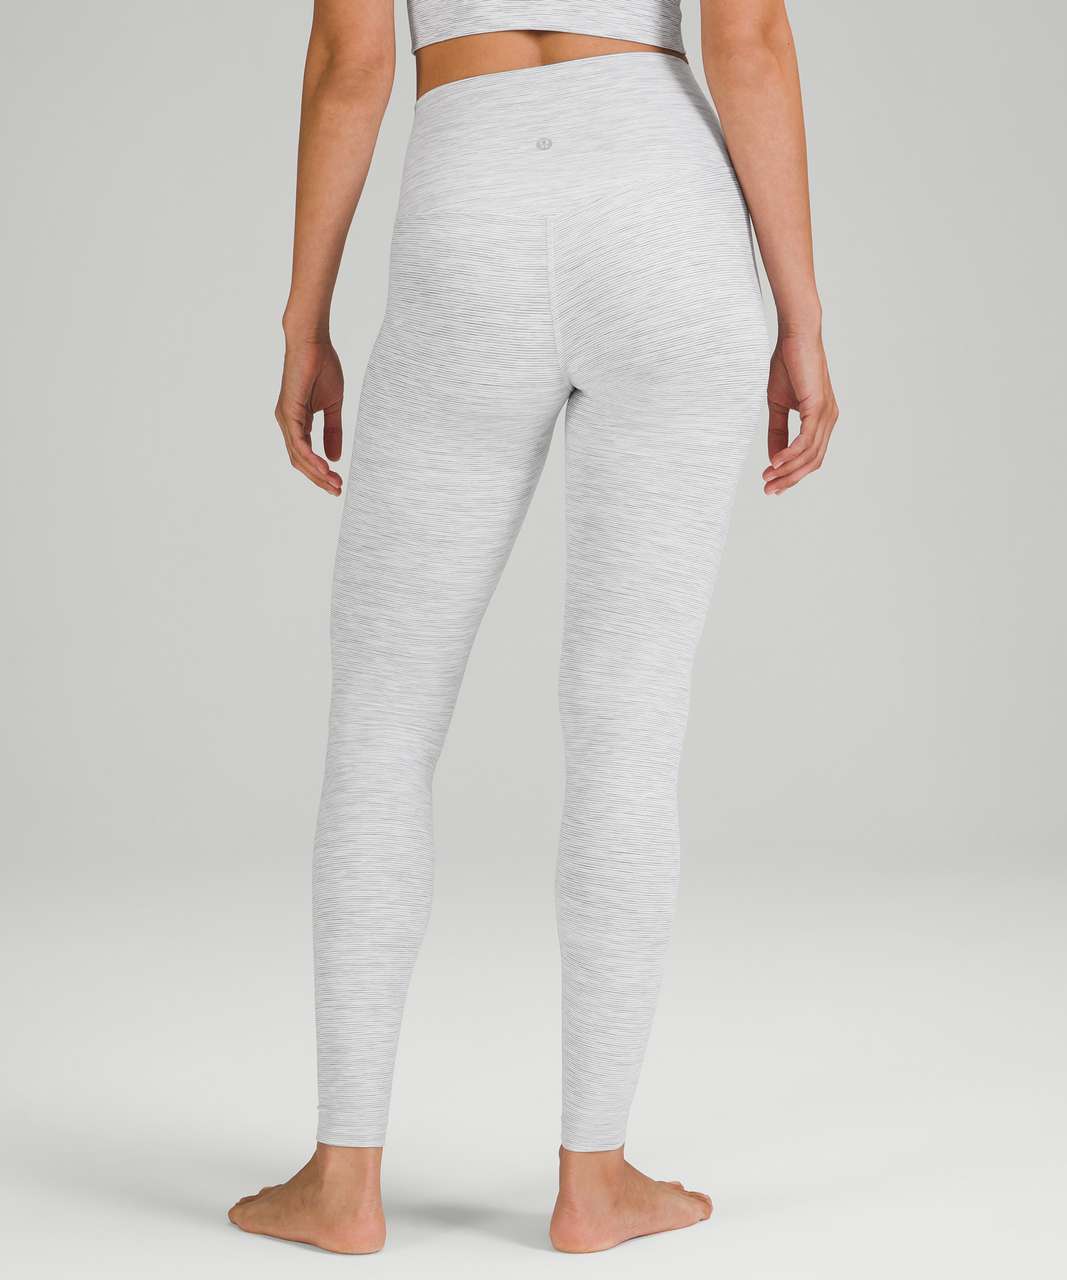 Lululemon Align High-Rise Pant 28" - Wee Are From Space Nimbus Battleship